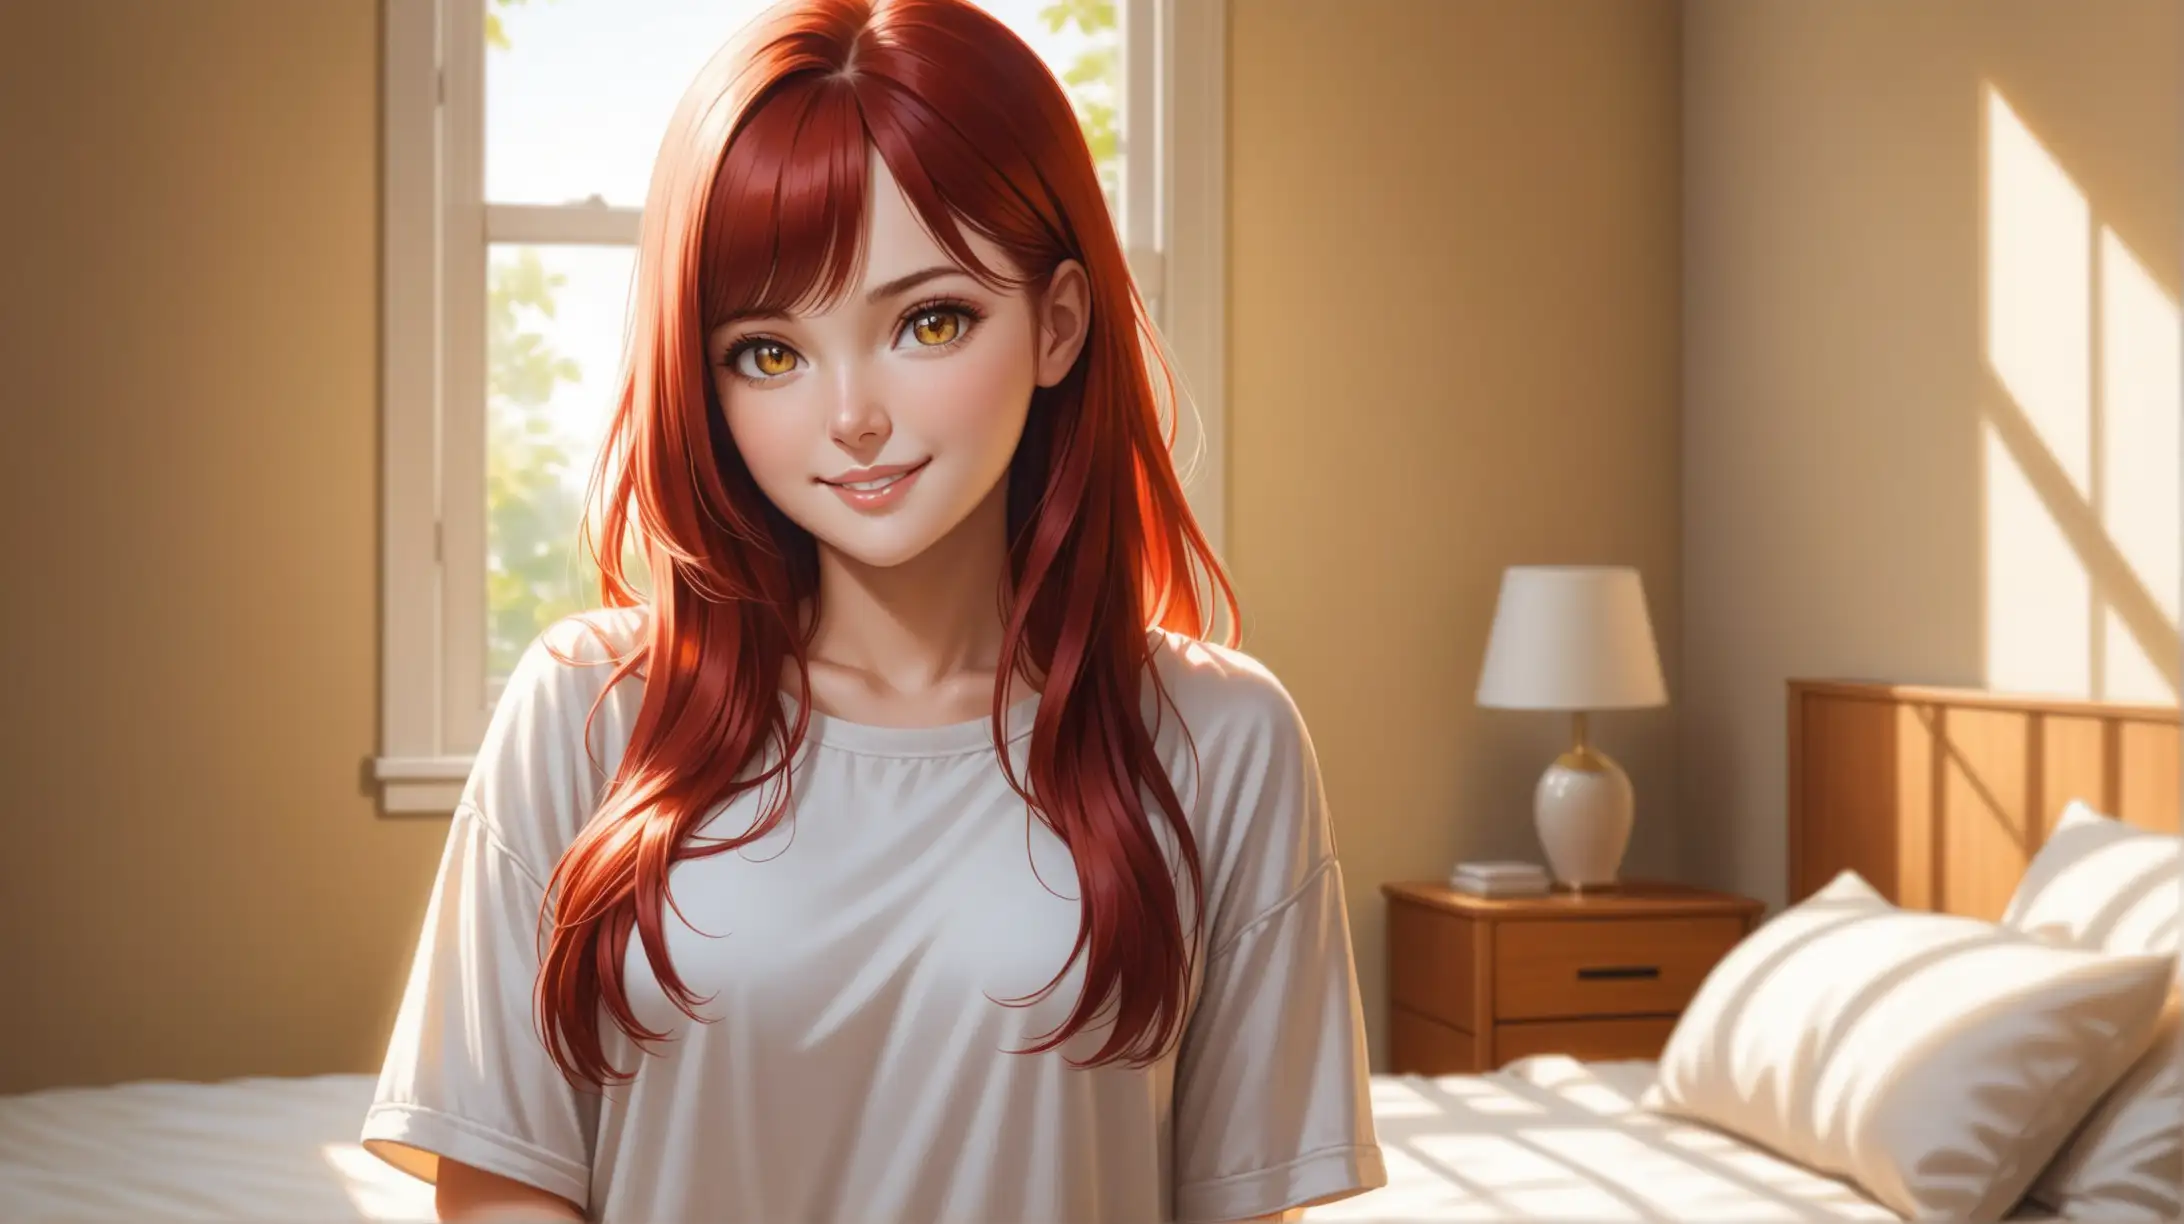 Smiling Woman with WaistLength Red Hair in Casual Bedroom Setting